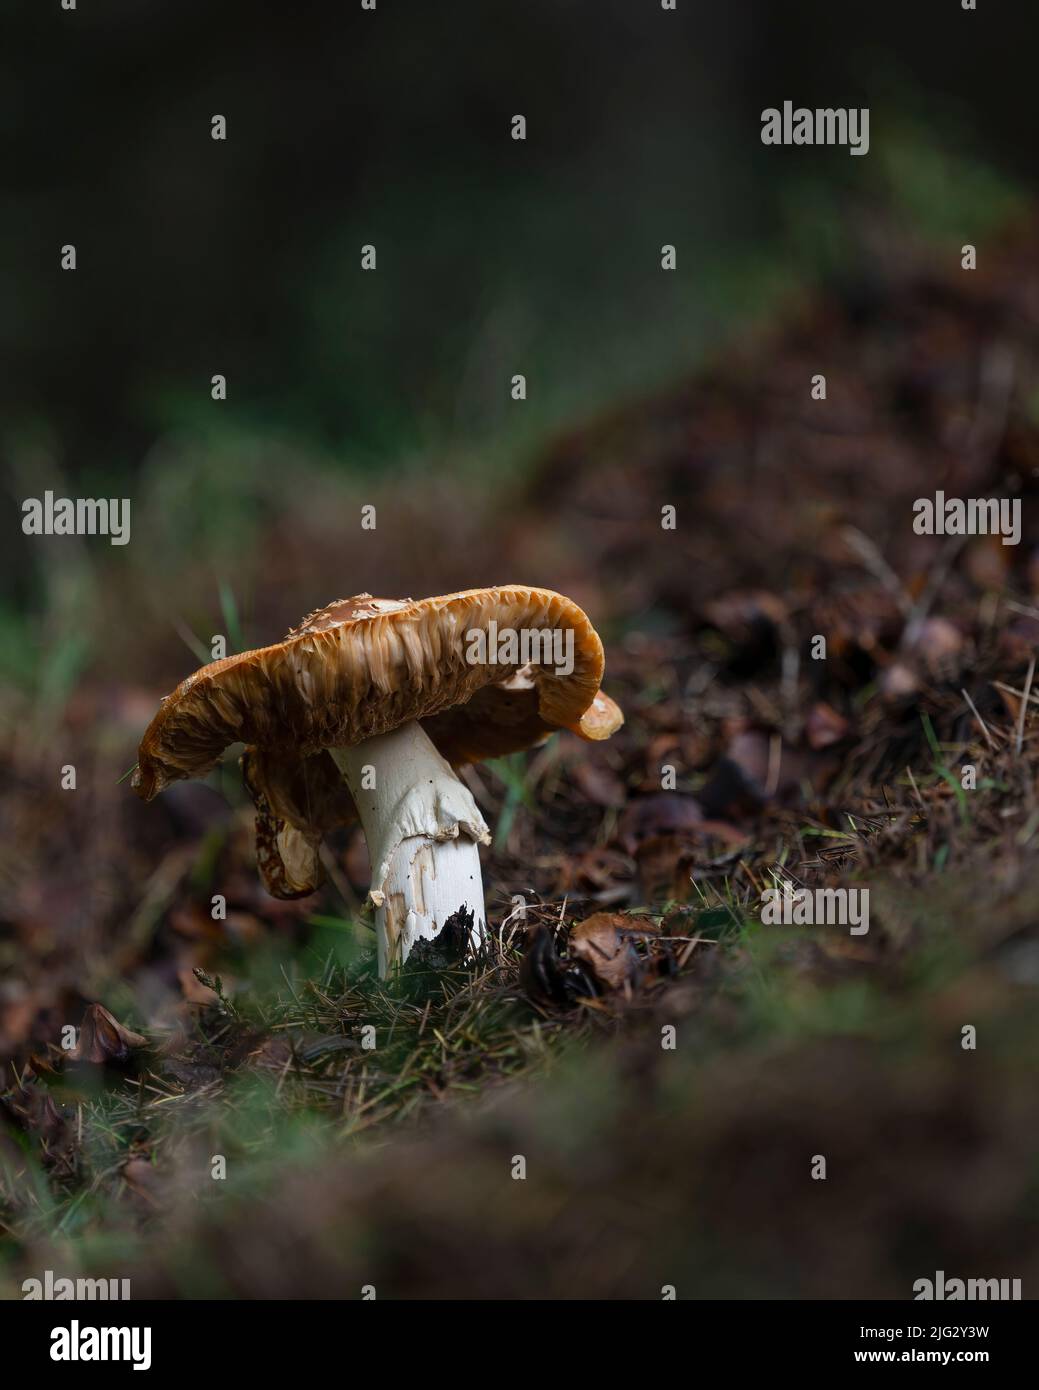 Decaying mushroom amanita muscaria on the forest floor. Vertical format. Stock Photo